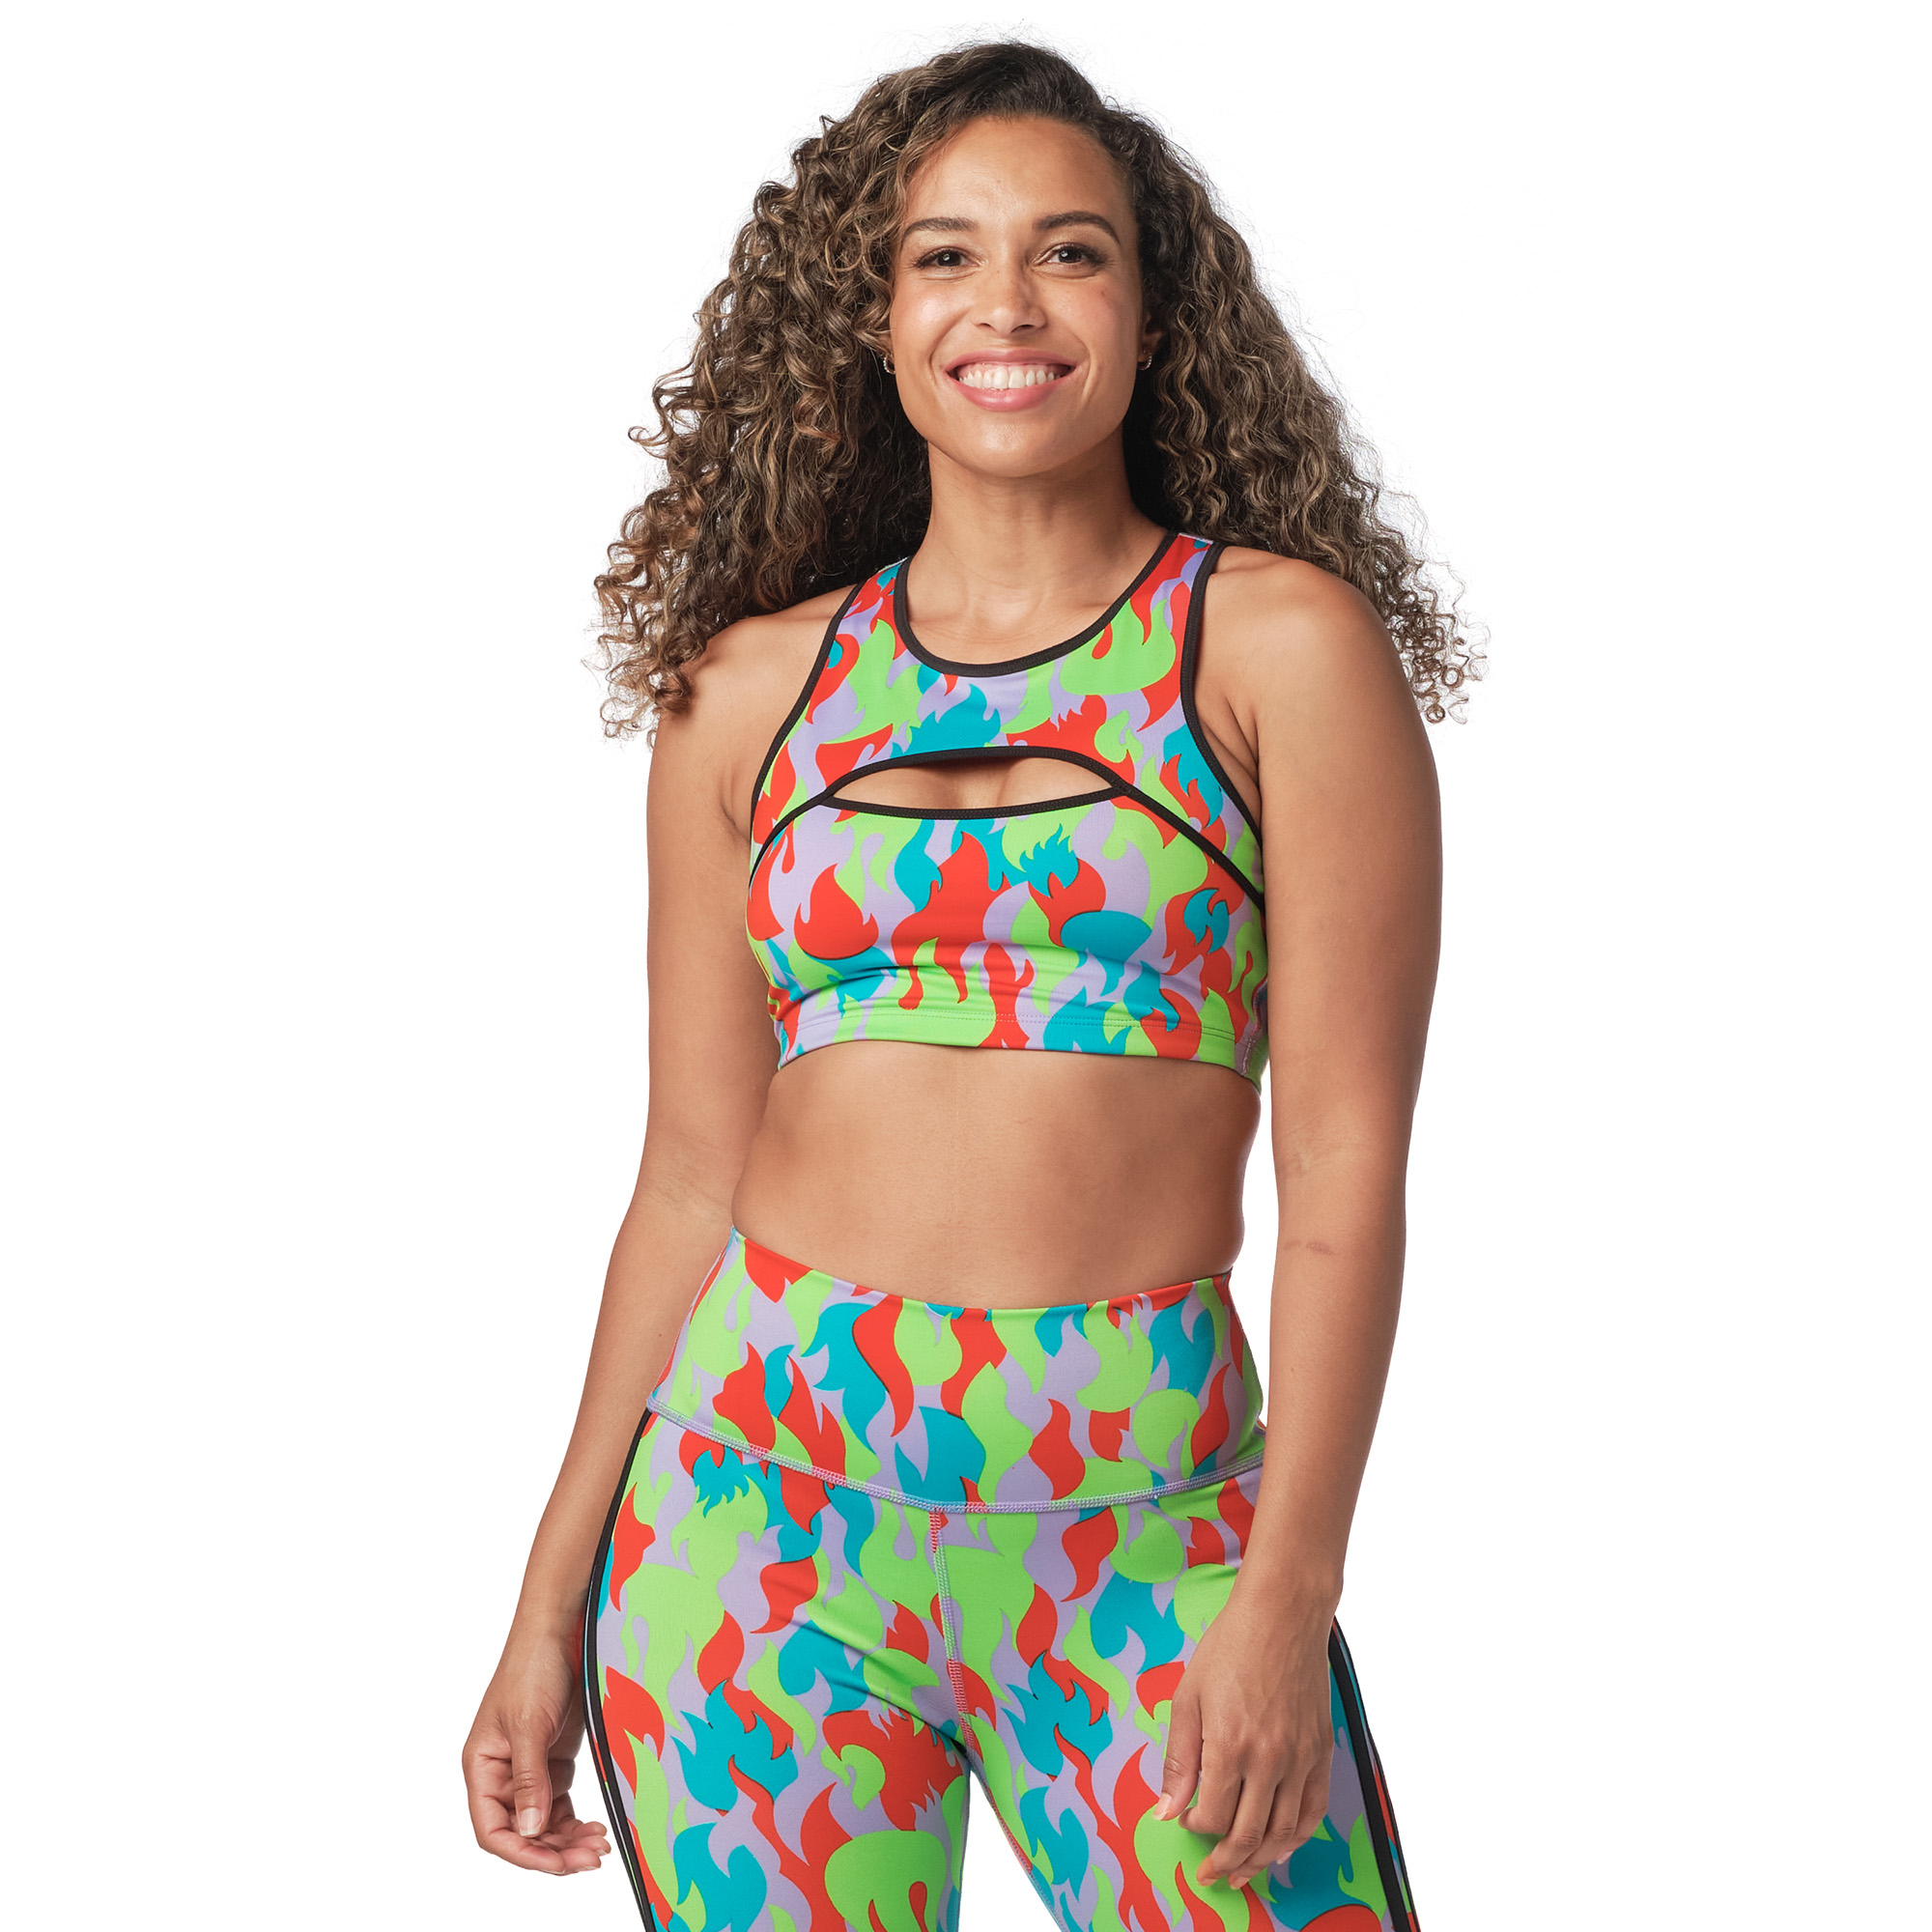 Zumba Upbeat Bra: Branded, Slim Crop with High Coverage, Medium Support,  and Moderate Compression - Get Moving!